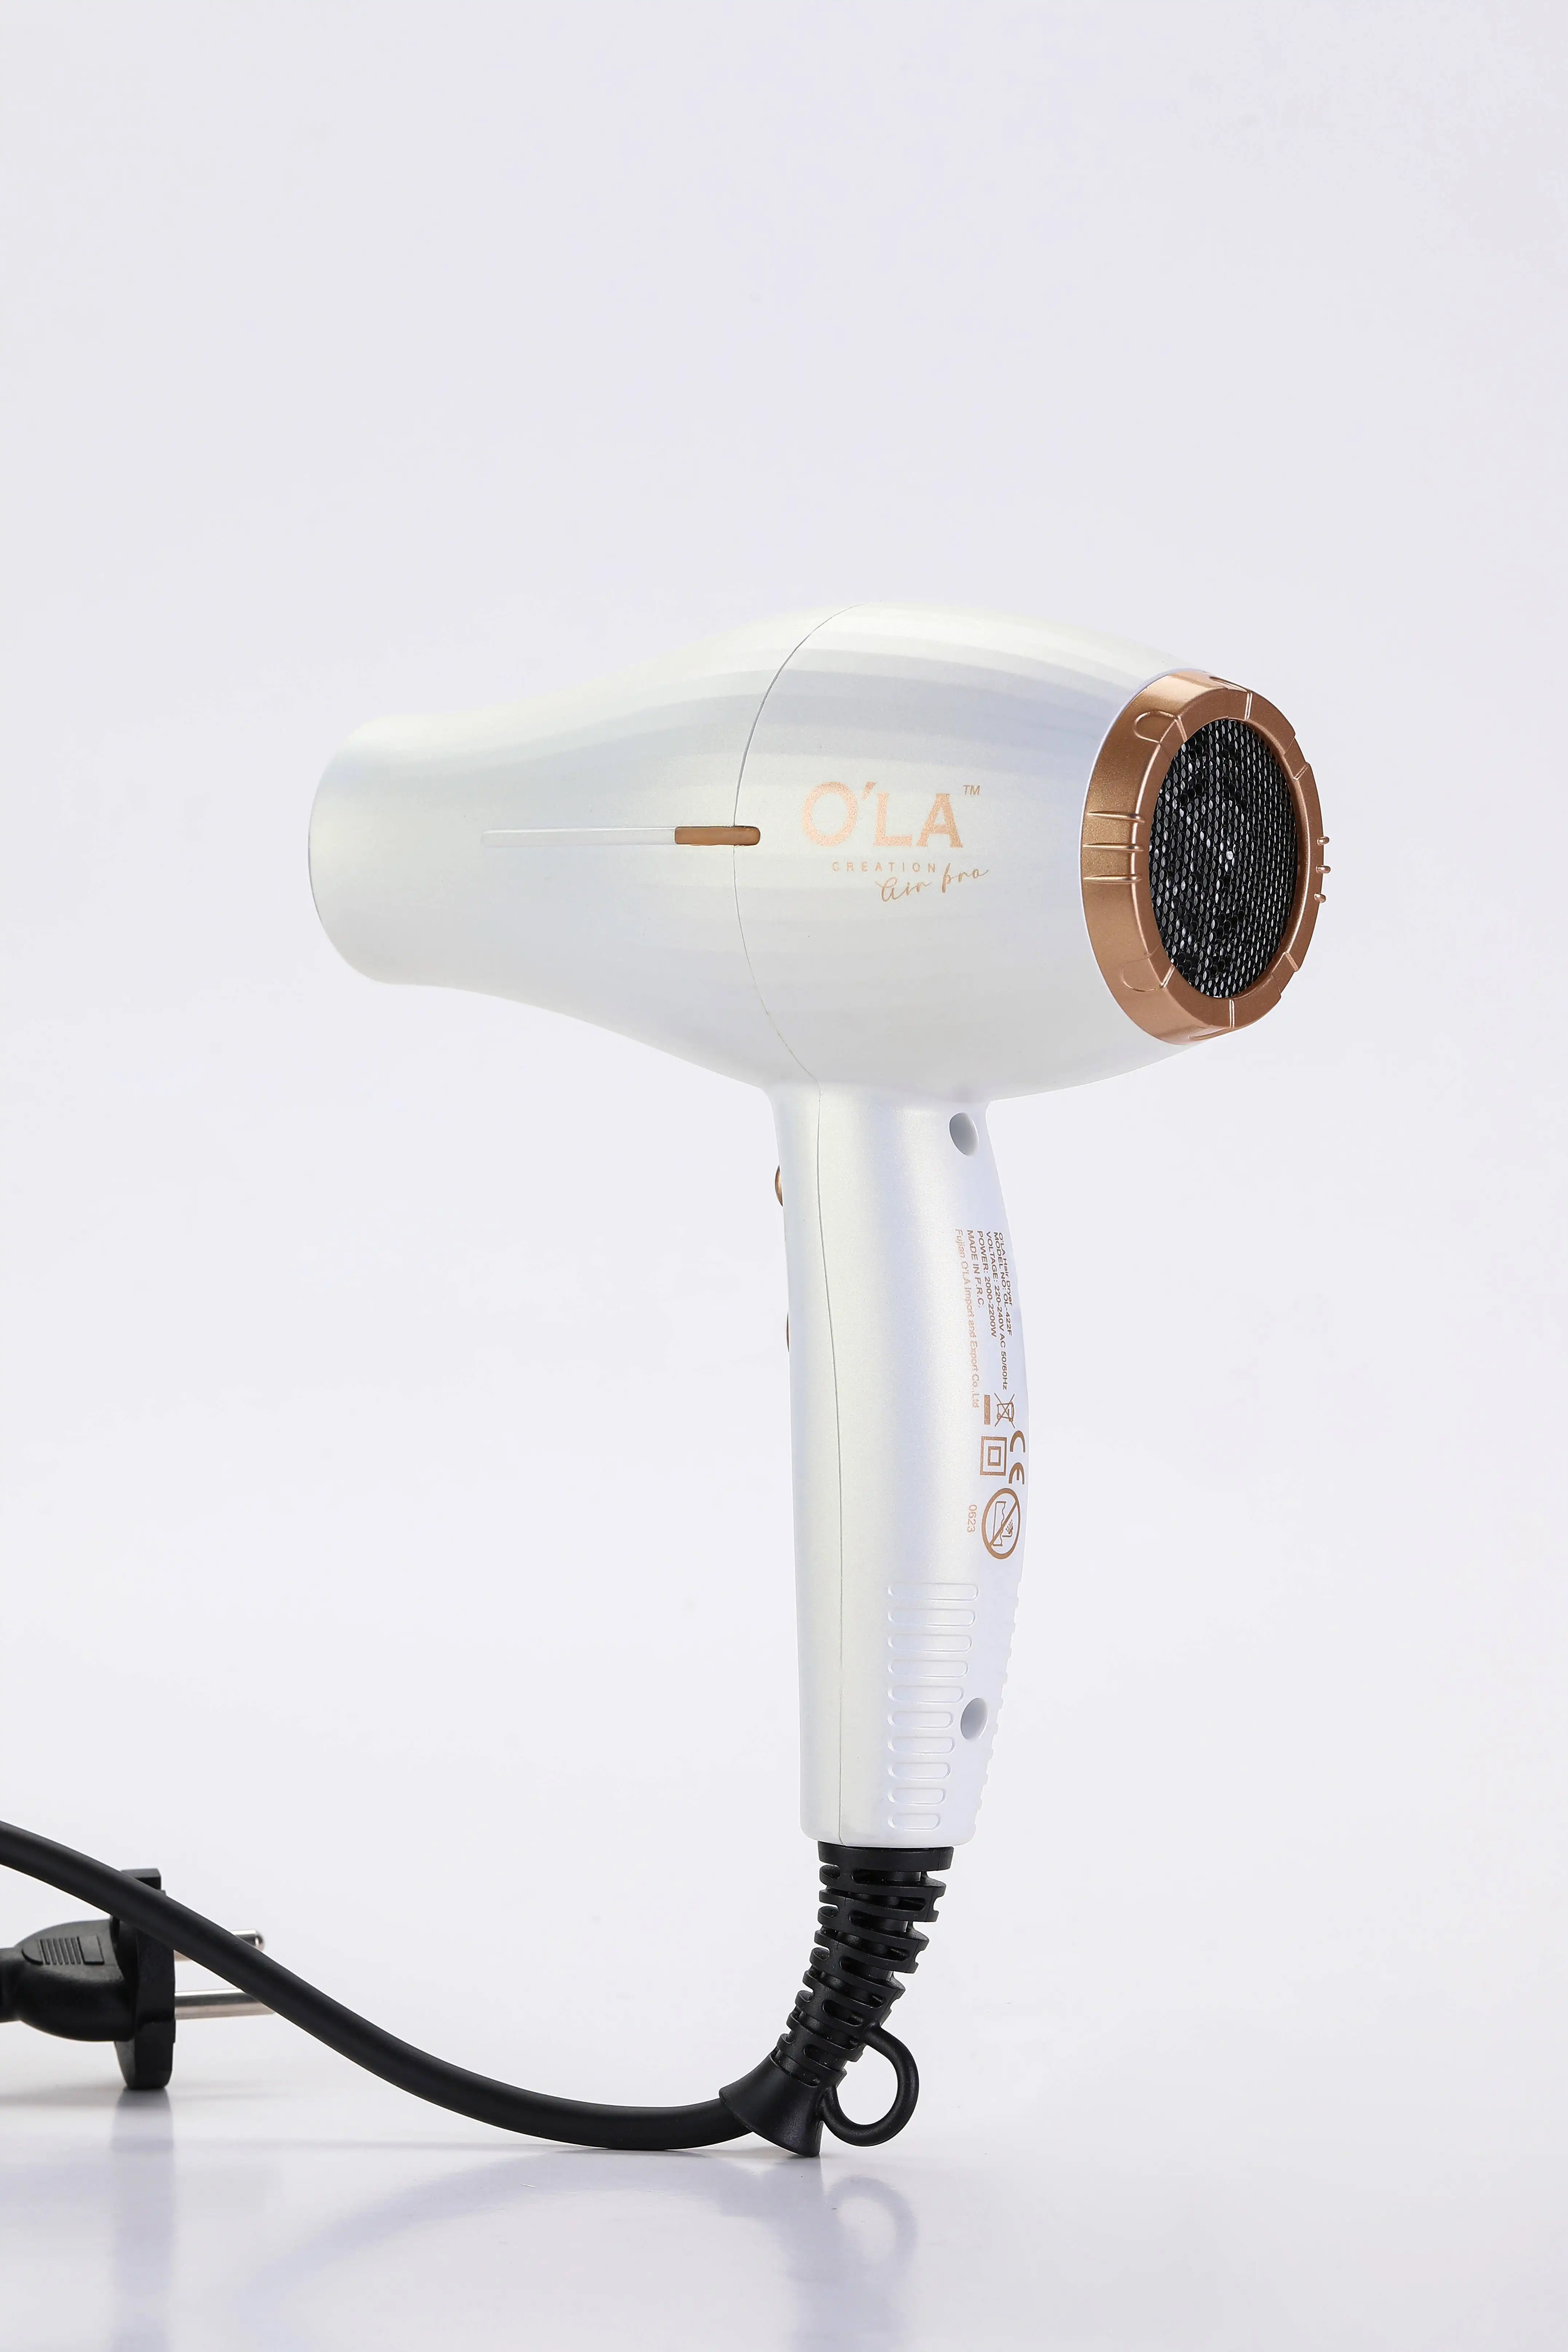 O'LA Professional Salon High Speed Hair Dryer Wholesale Hair Blow Dryer Ac Motor Powerful Hair Dryers Support Cold and Hot Air